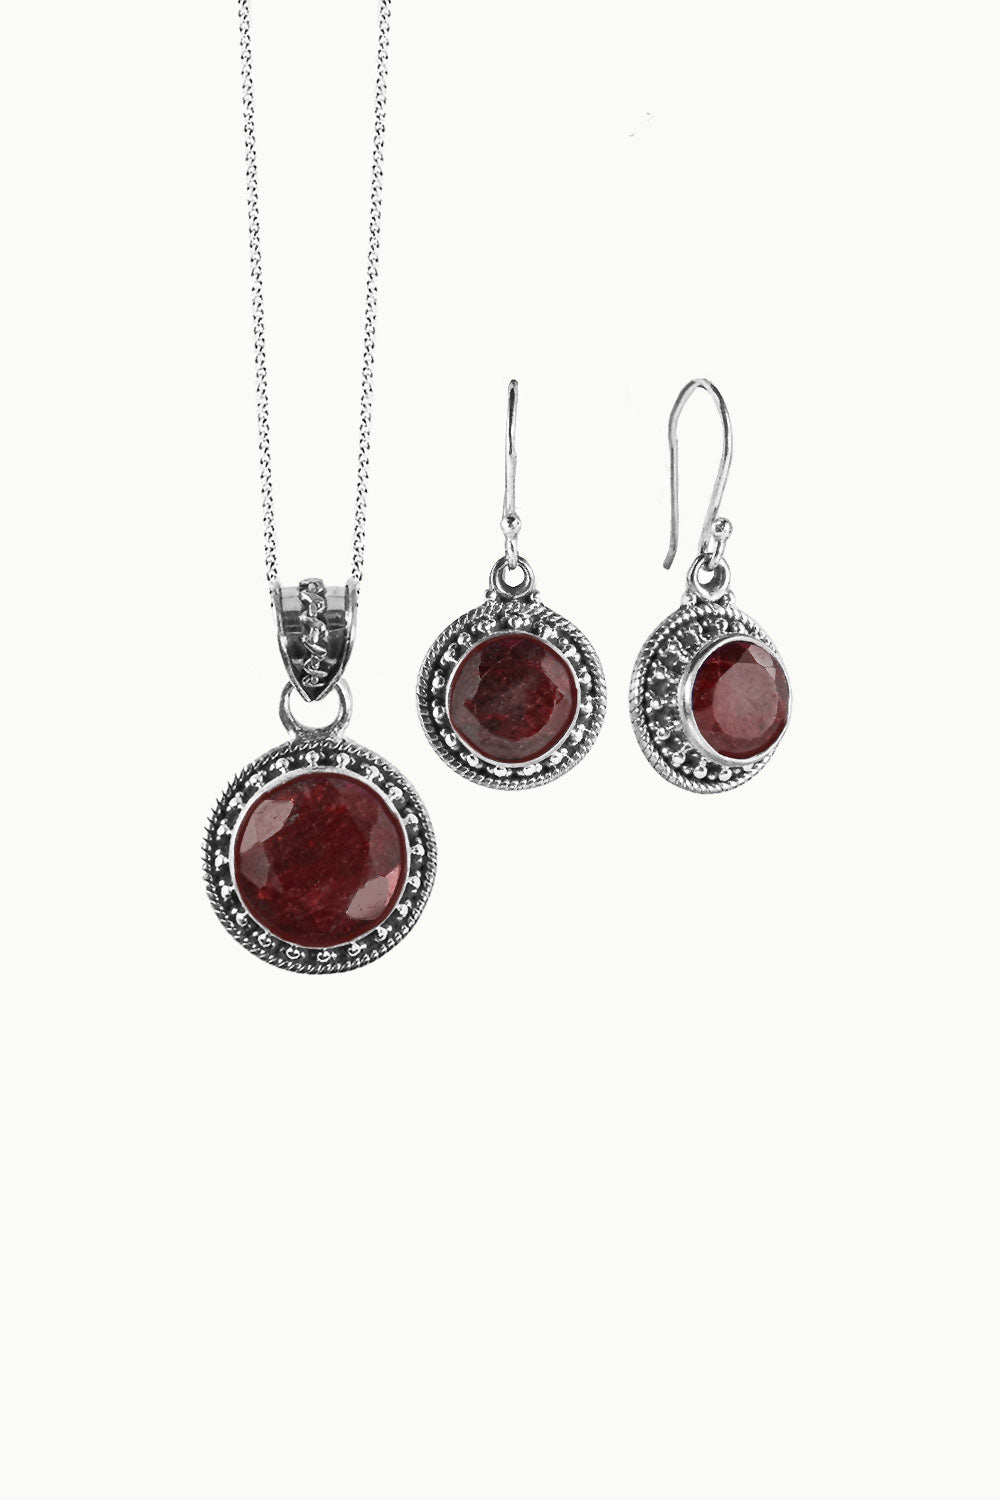 Sivalya Raw Ruby Silver Necklace and Earrings Jewelry Set - Aurora